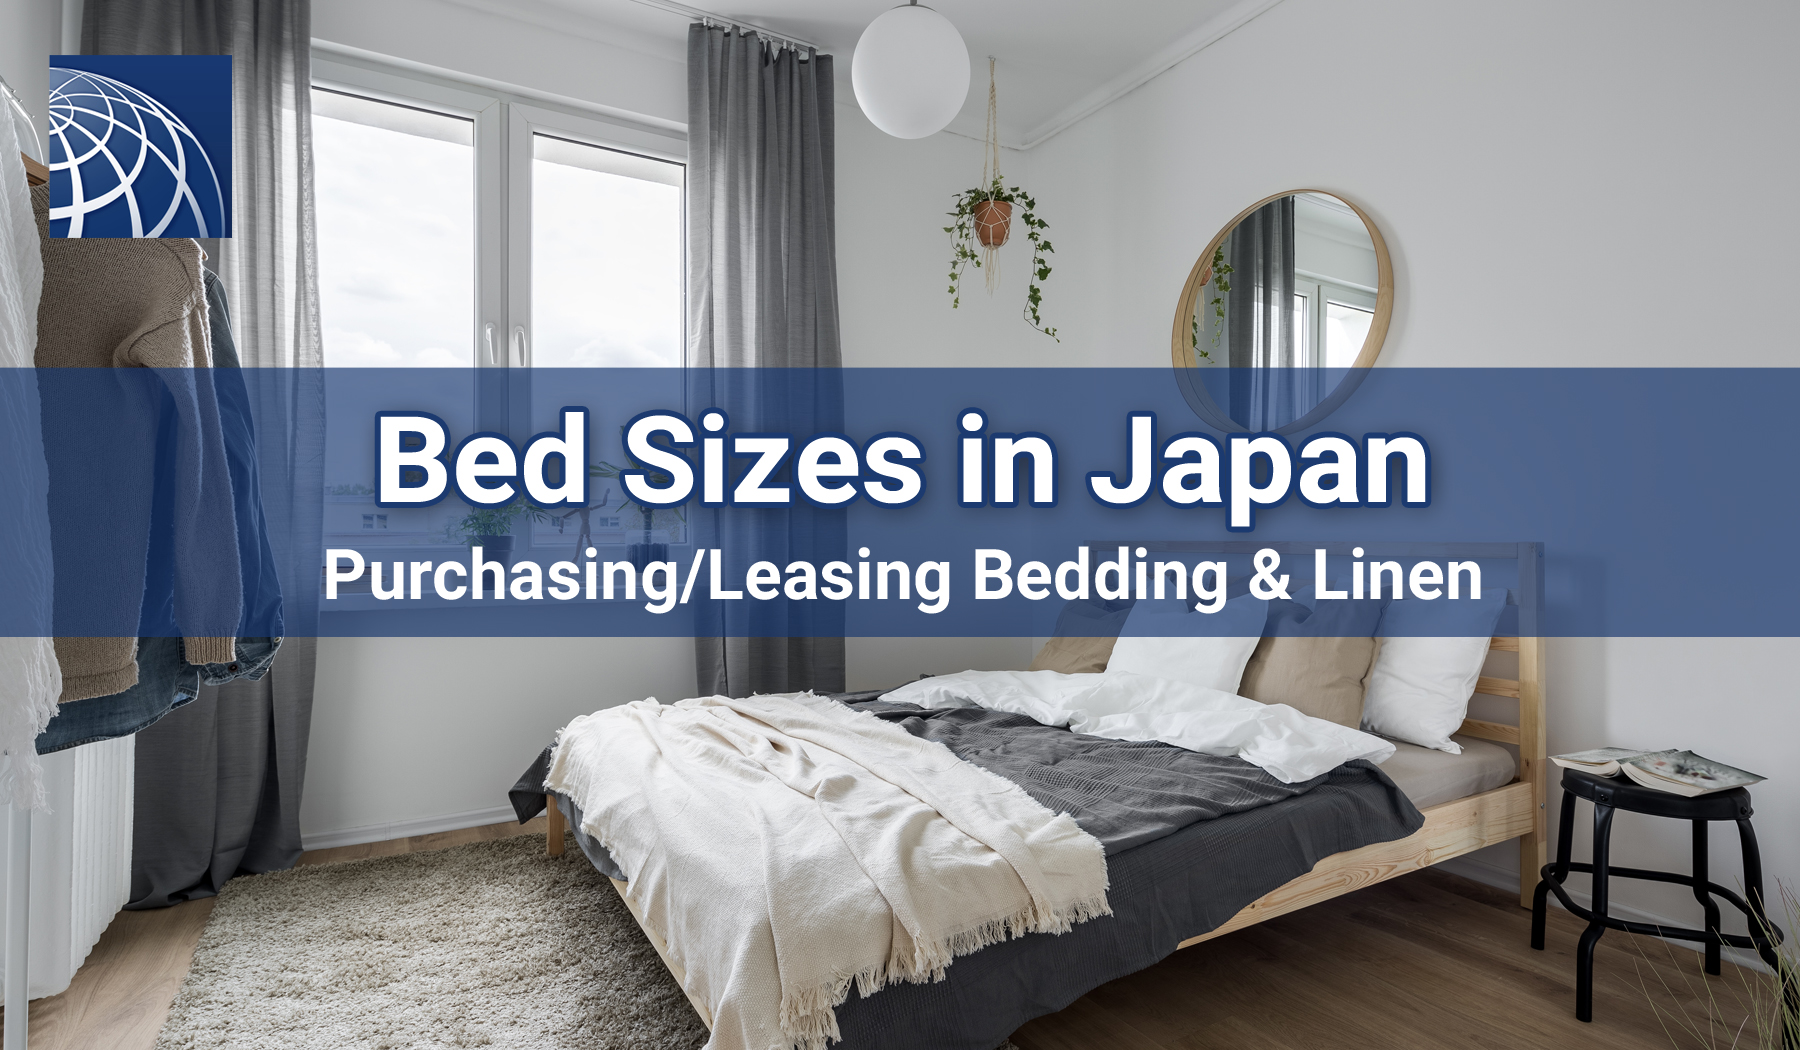 Bed Size in Japan - Purchasing Bedding & Linen in Japan - PLAZA HOMES